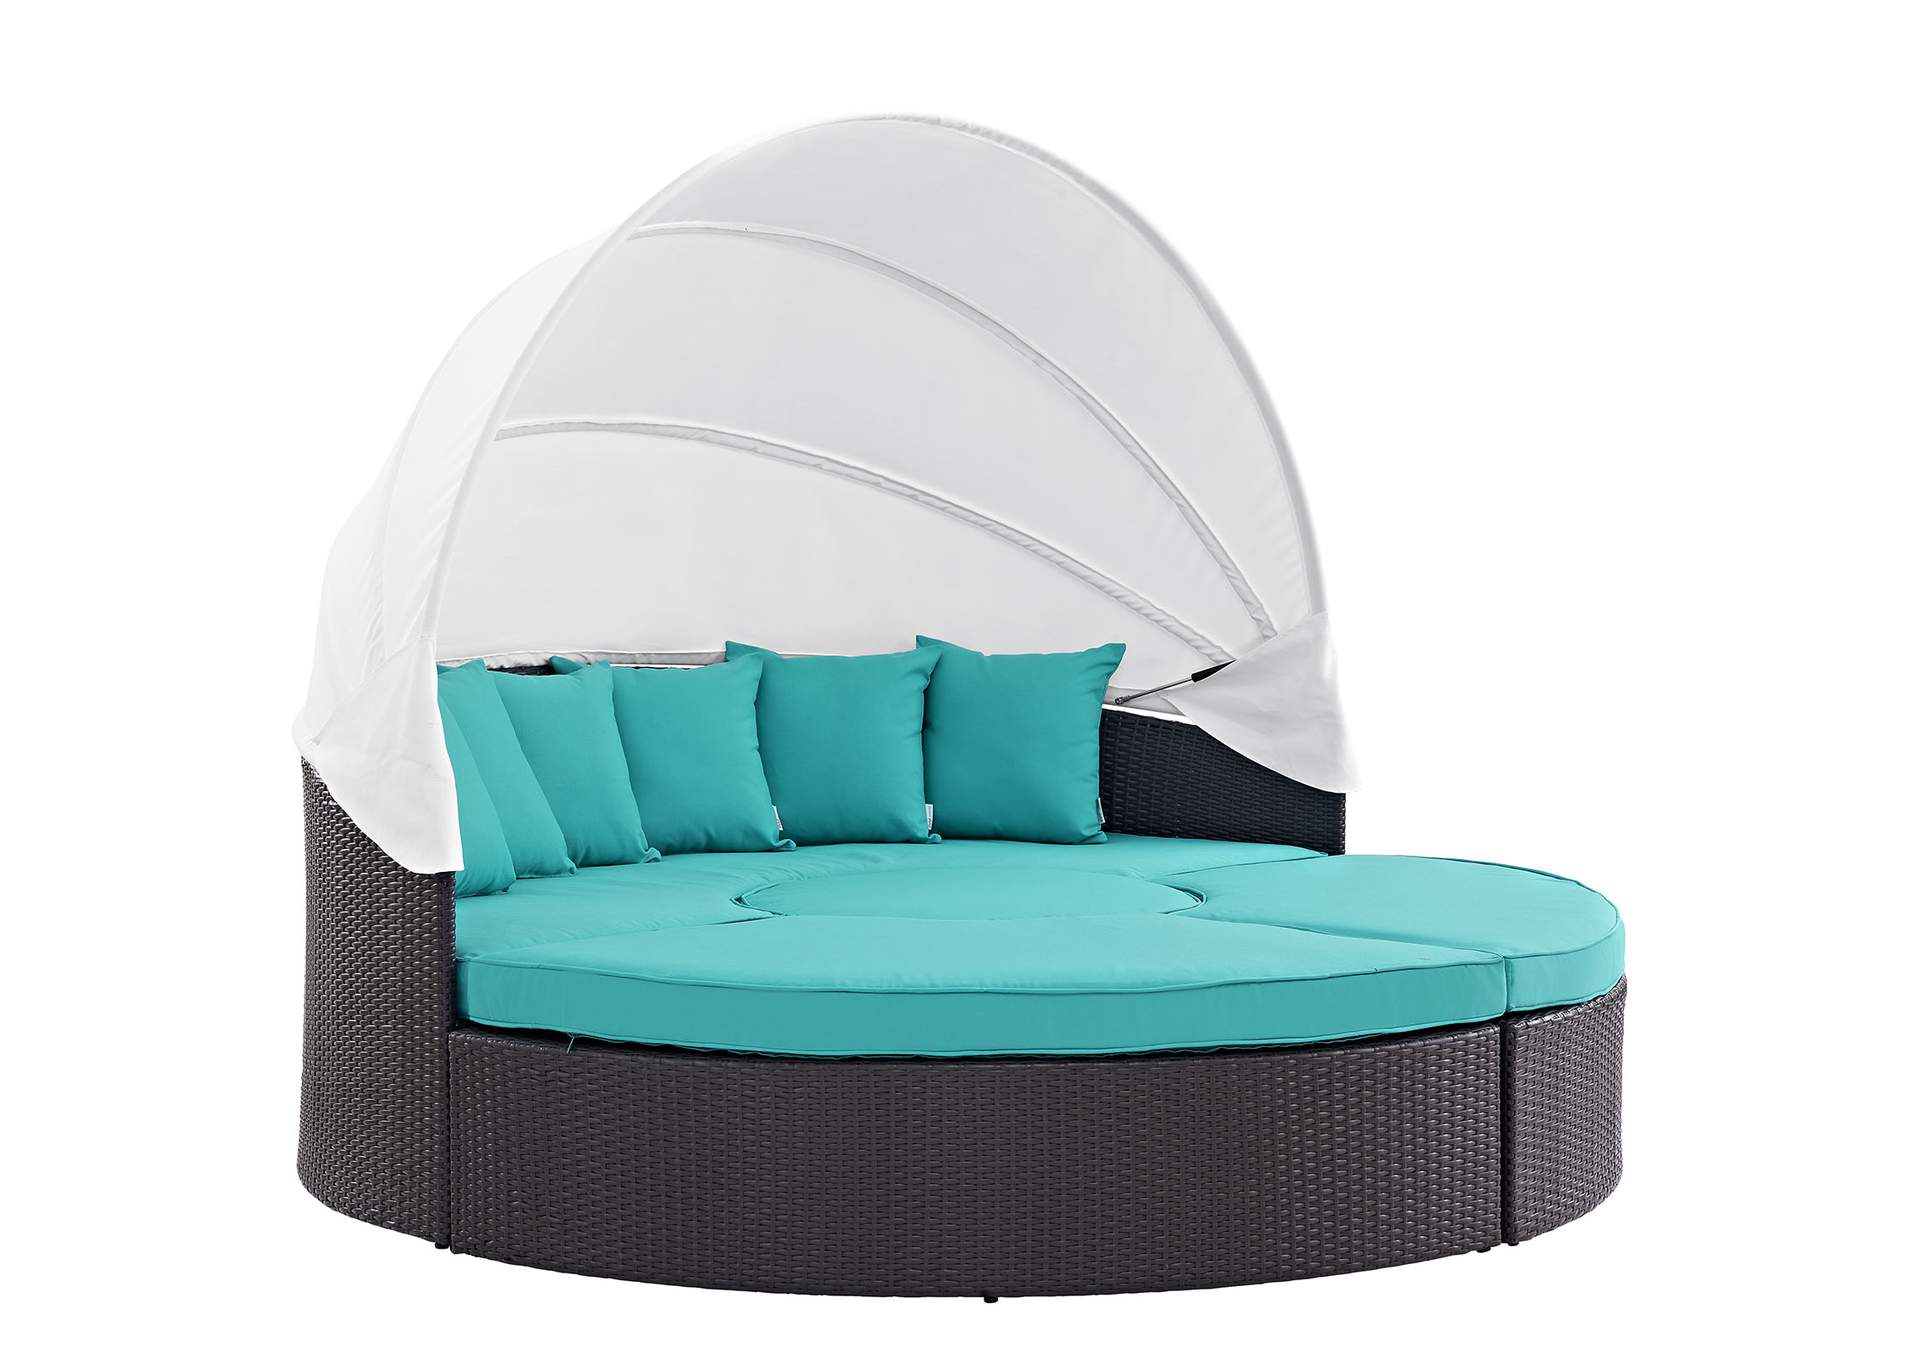 Espresso Turquoise Convene Canopy Outdoor Patio Daybed,Modway